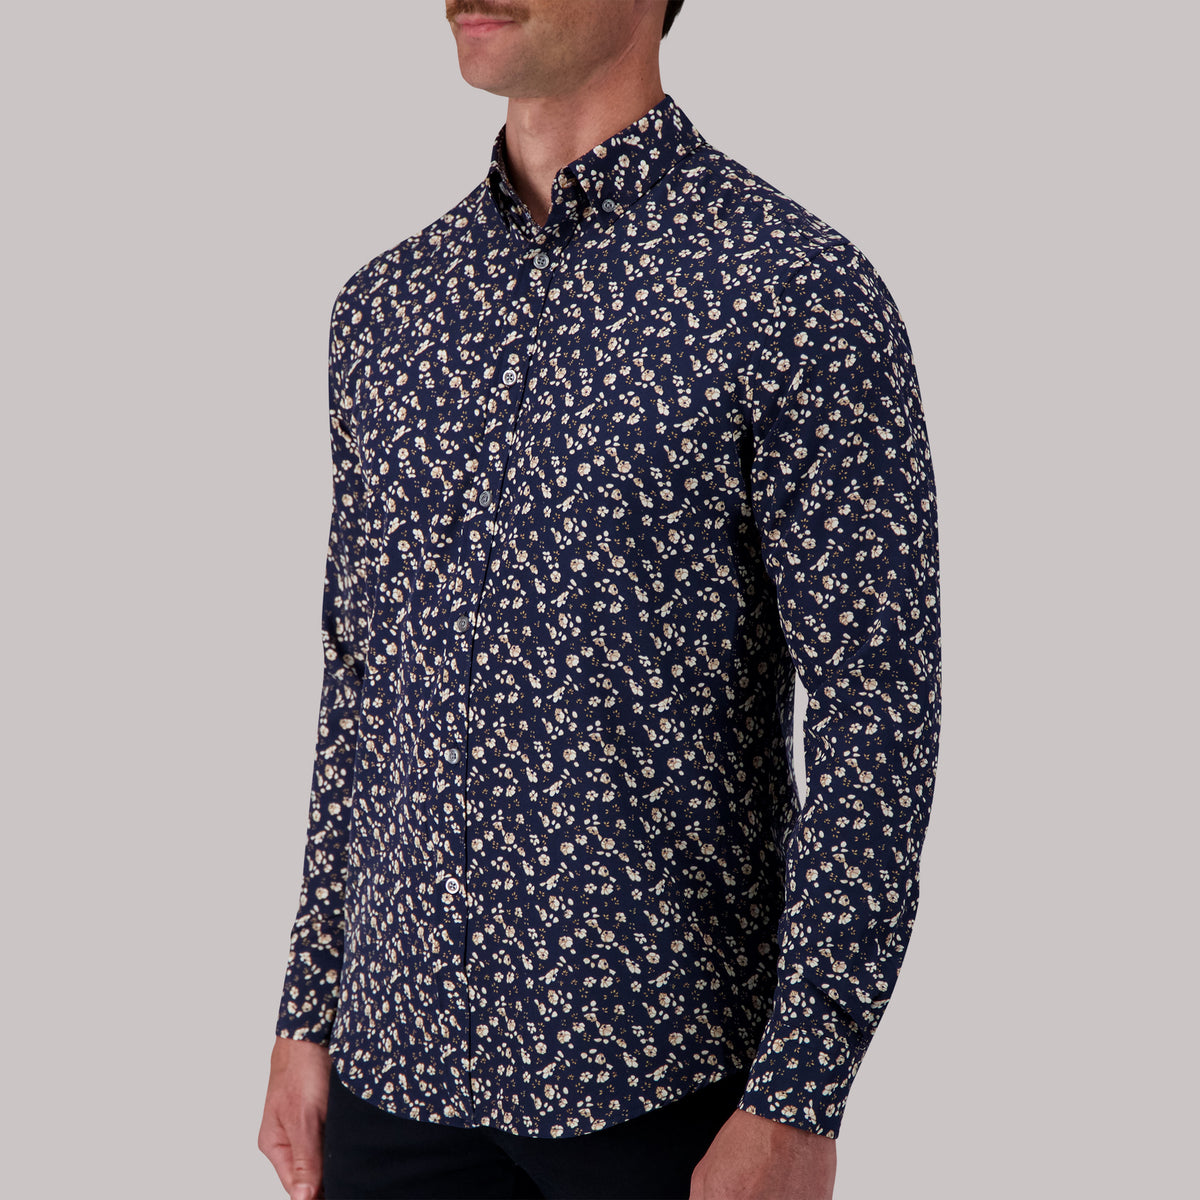 Model Side View of Long Sleeve 4-Way Sport Shirt with Floral Print in Navy